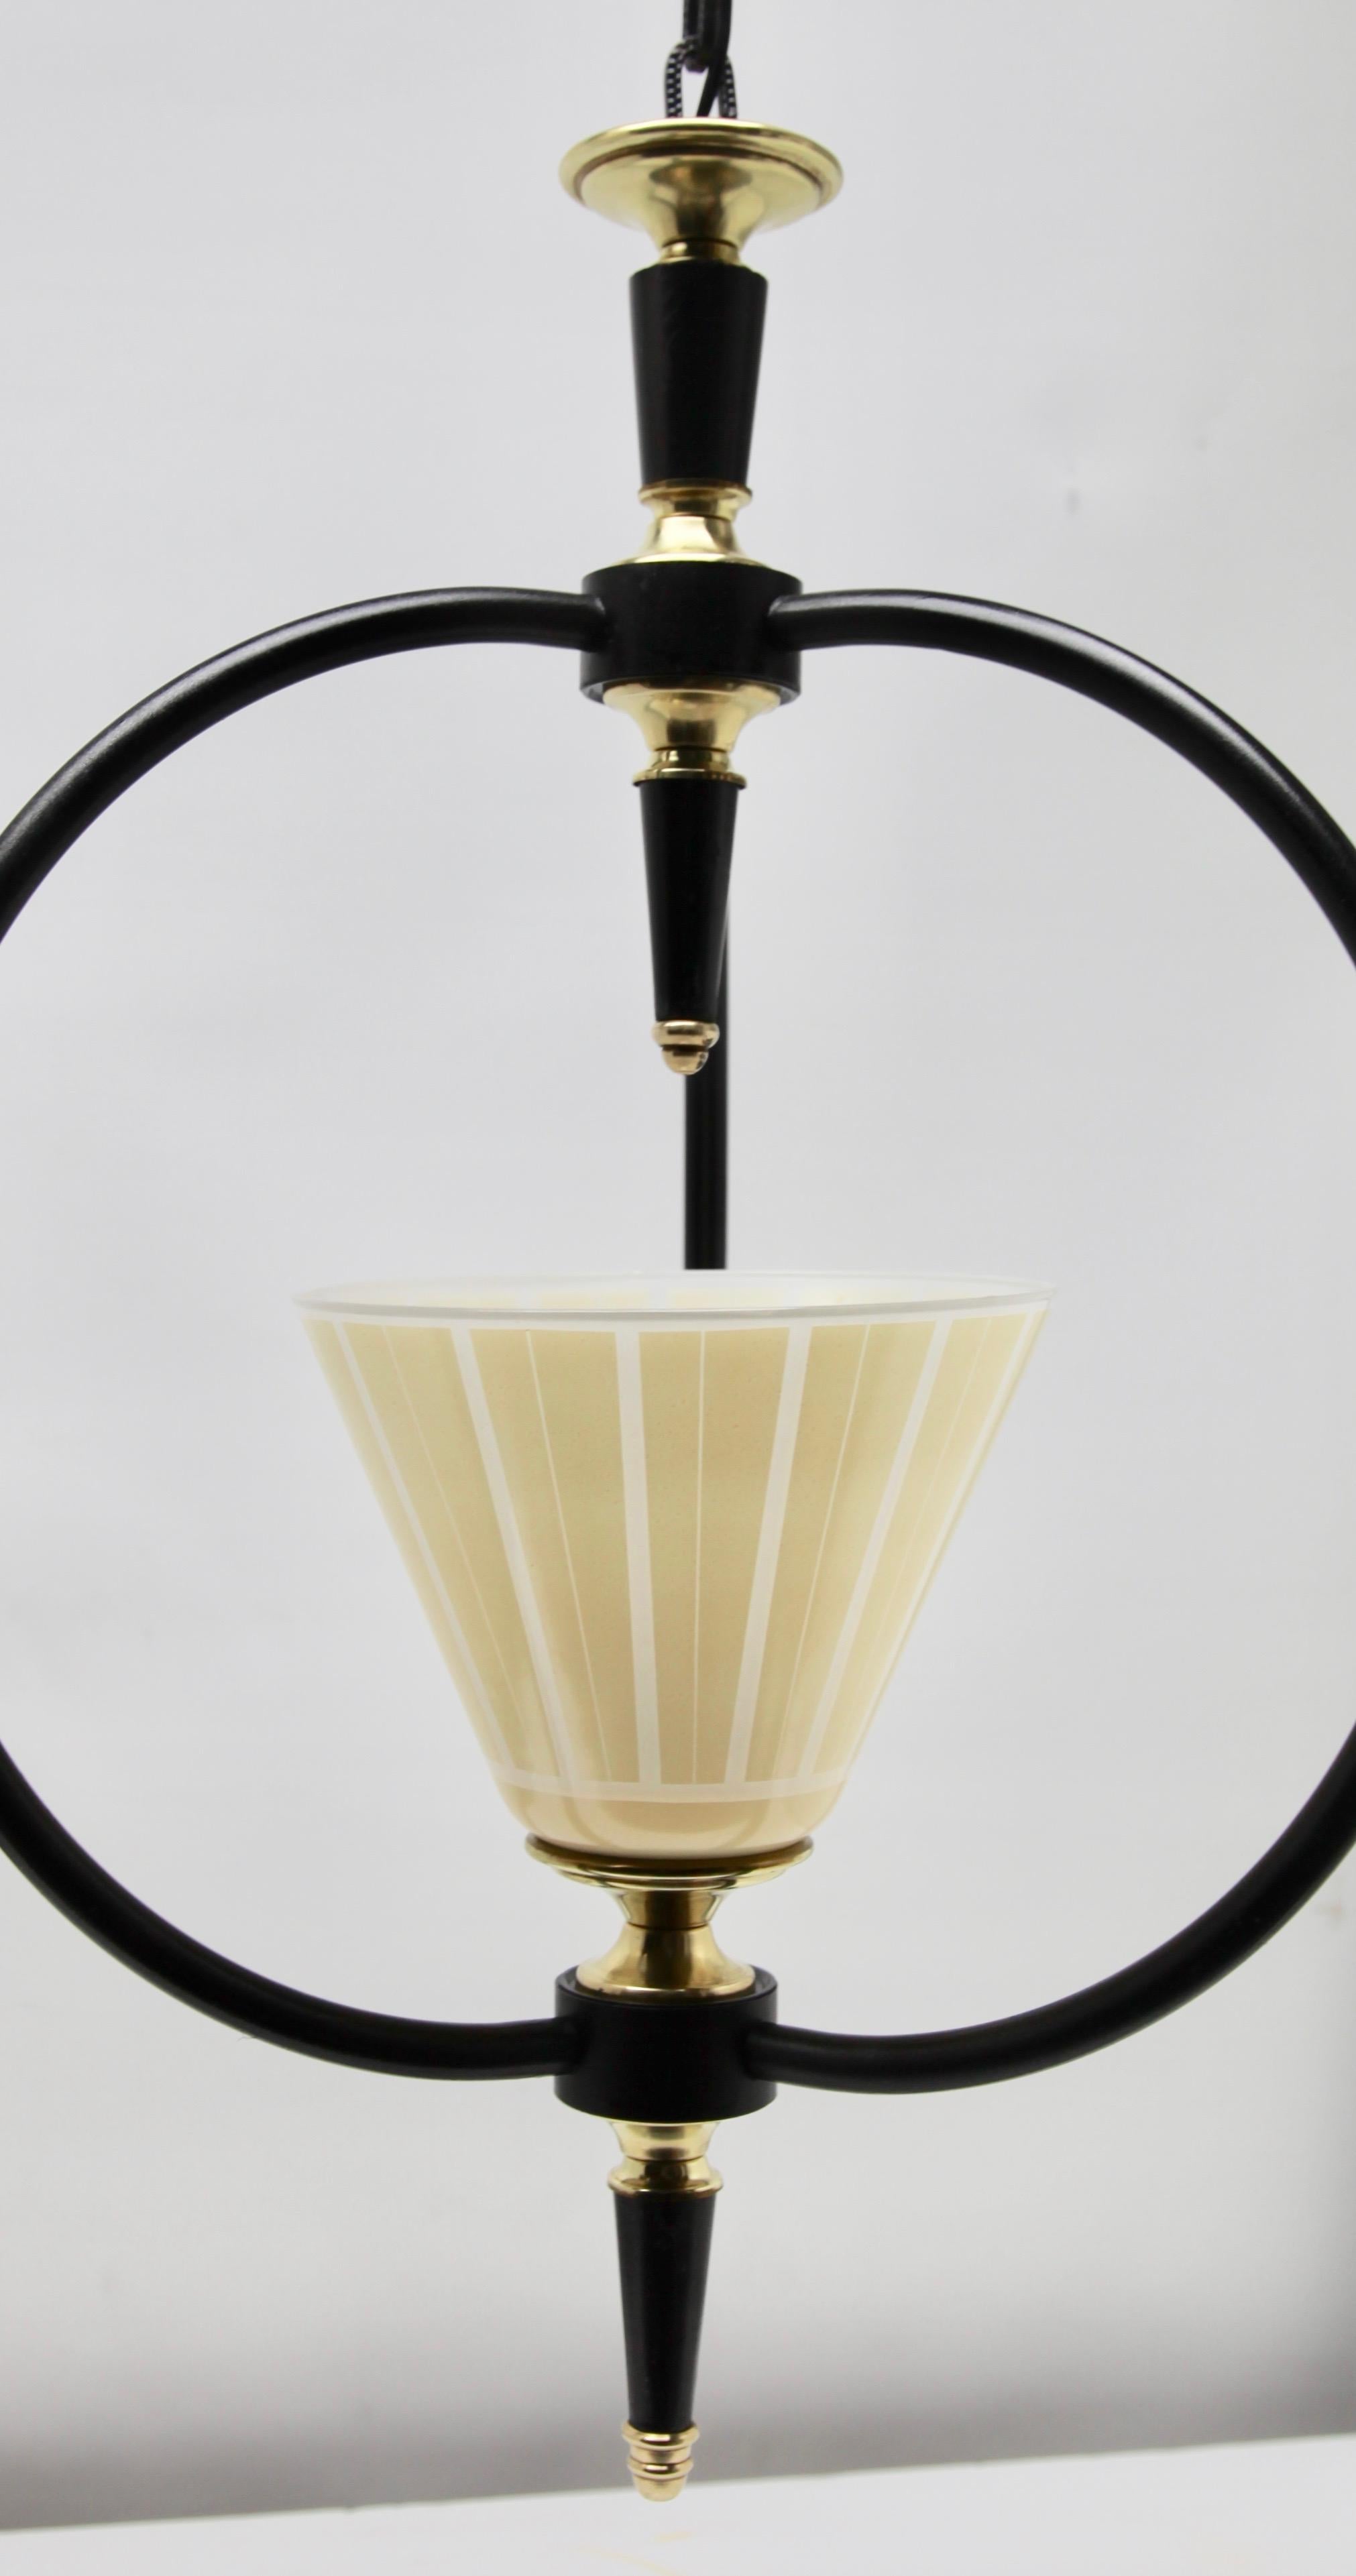 Midcentury Pendant Lobby Light Metal and Opaline Lampshade, 1950s For Sale 3